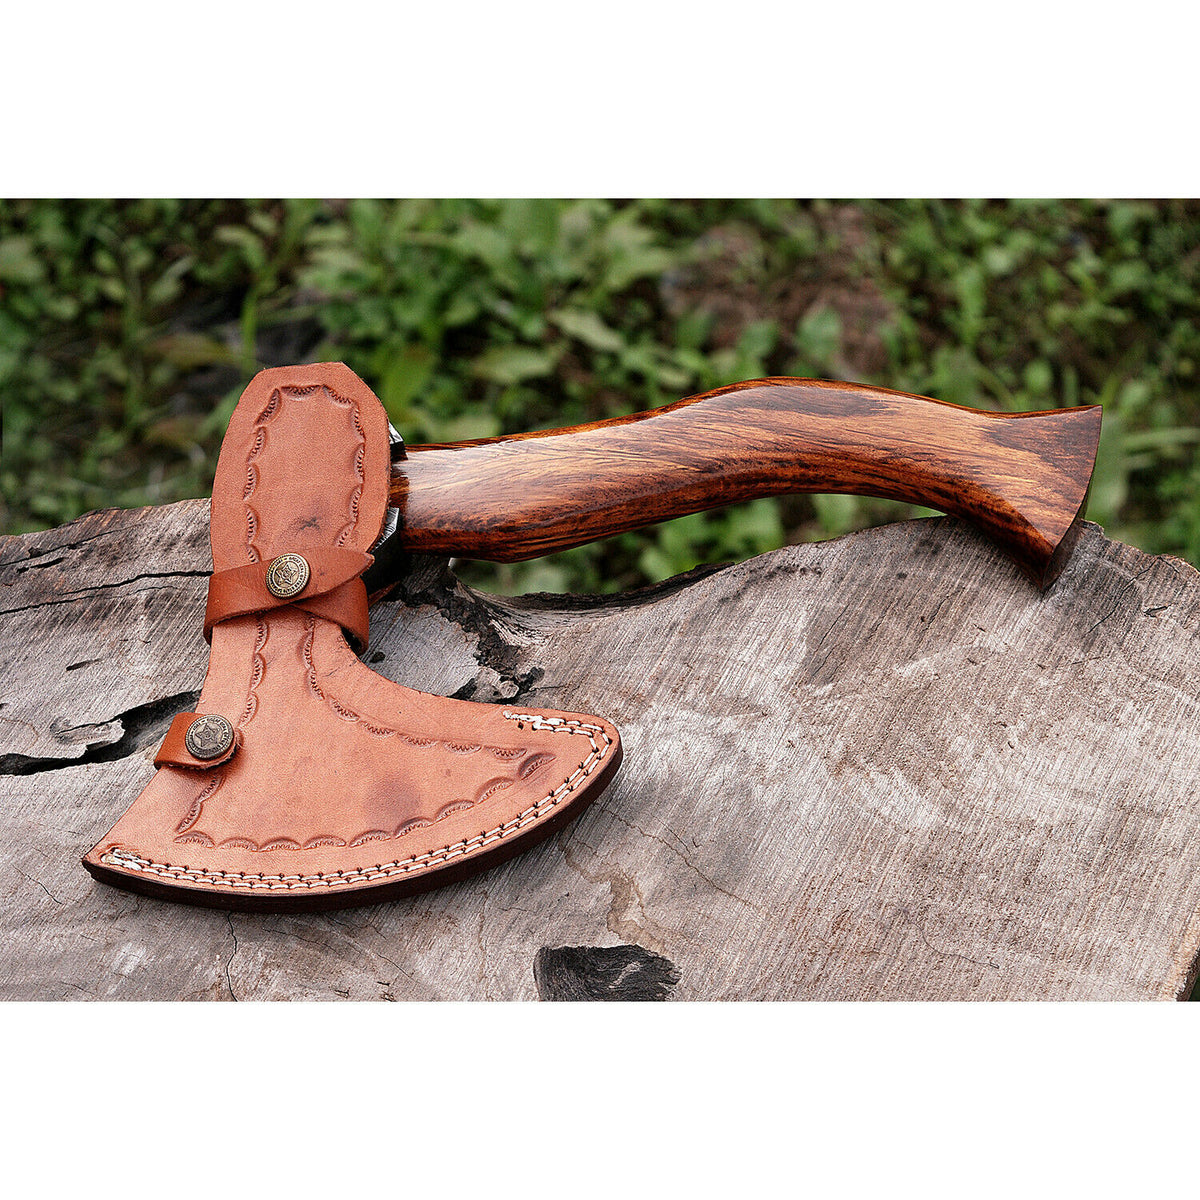 Details about   Handmade Damascus Steel Hatchet/Axe Blank-Heat Treated-Camping-Outdoor-HB1 